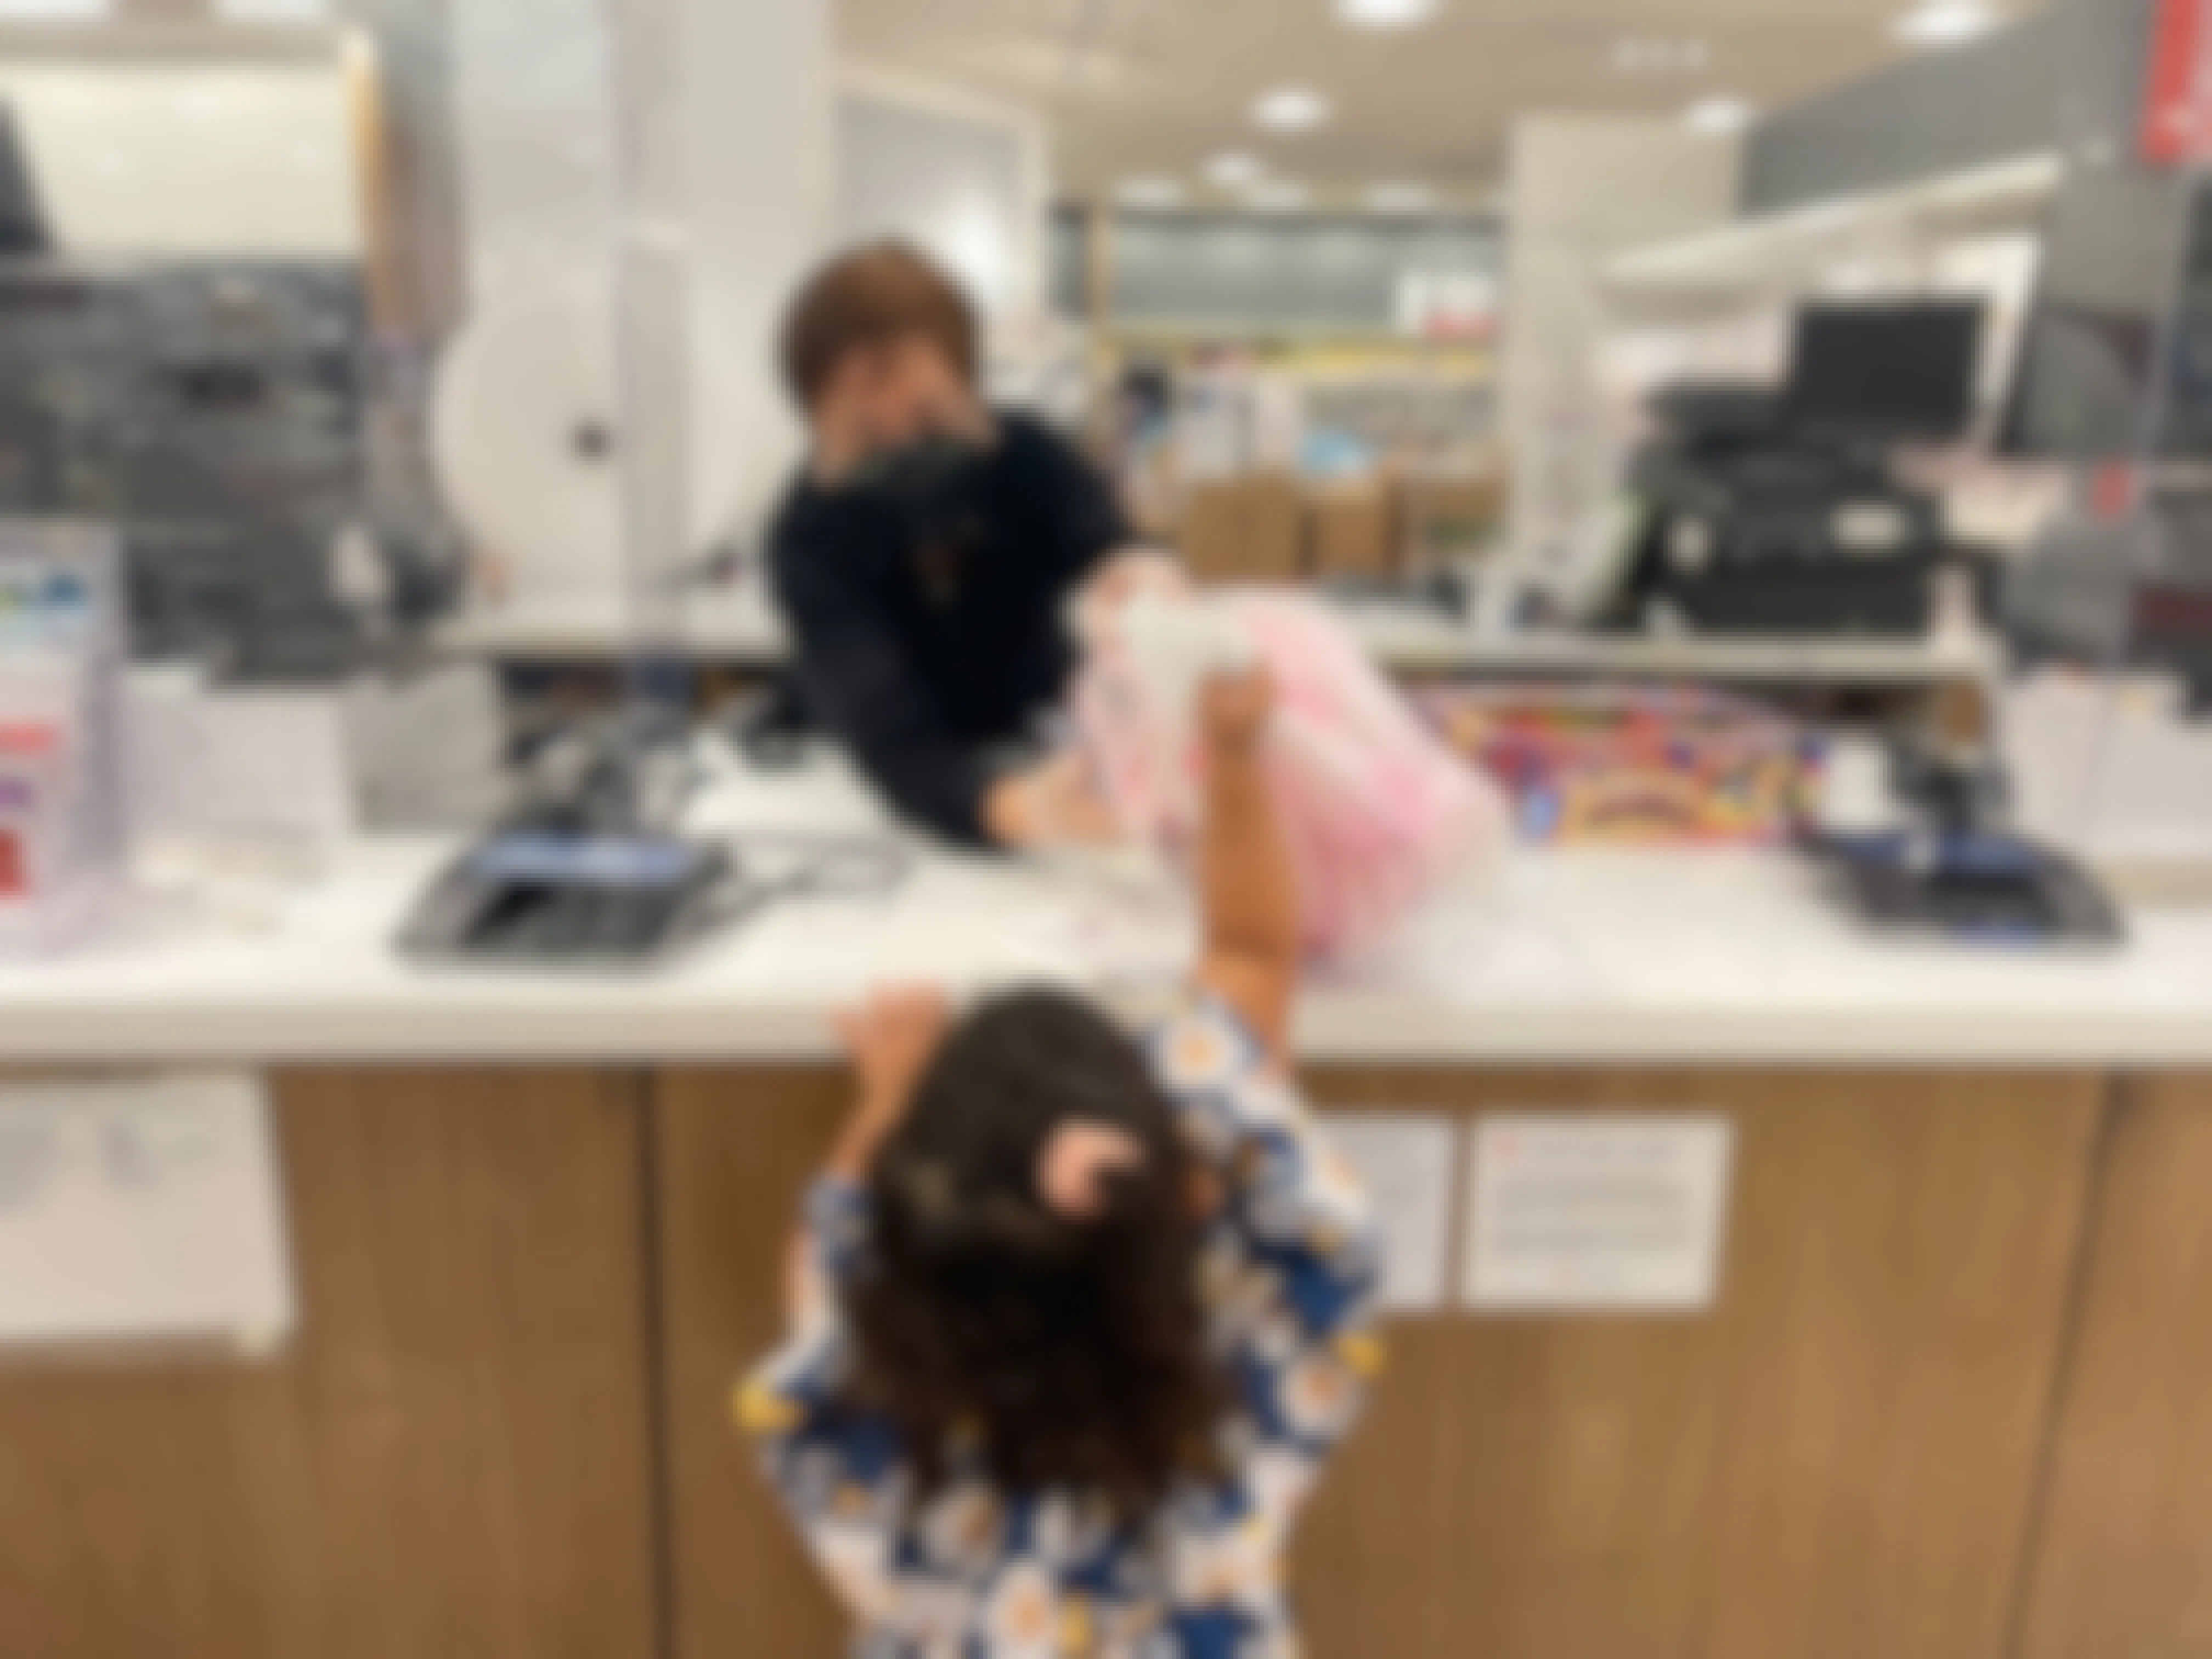 A small child taking a bag from a store cashier.